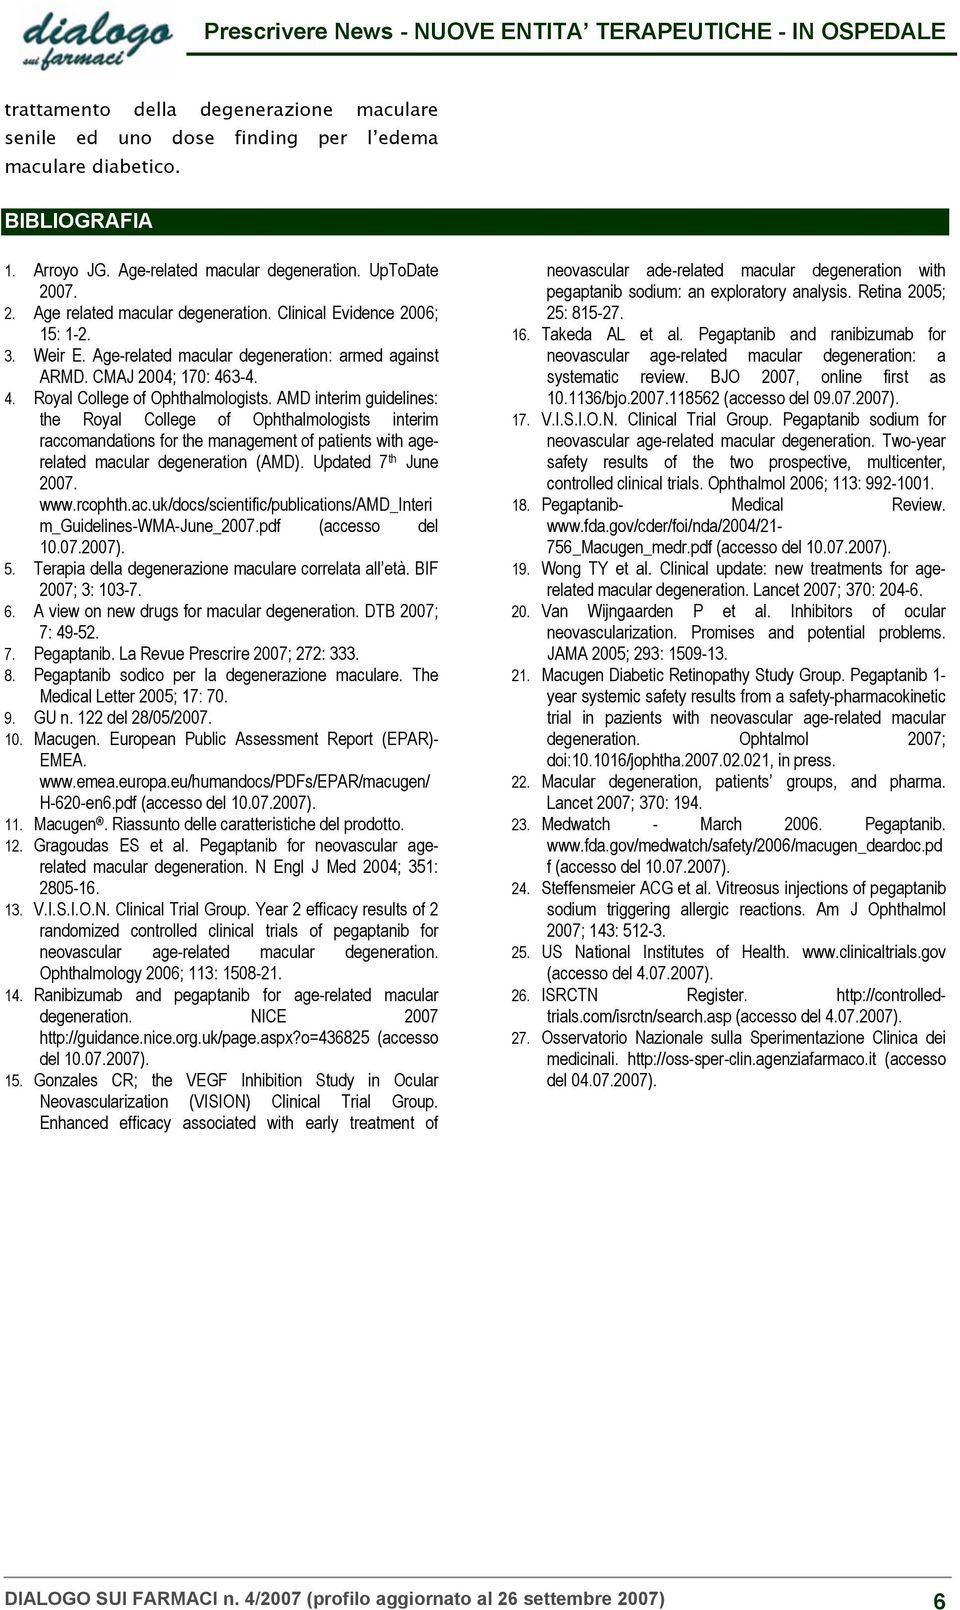 AMD interim guidelines: the Royal College of Ophthalmologists interim raccomandations for the management of patients with agerelated macular degeneration (AMD). Updated 7 th June 2007. www.rcophth.ac.uk/docs/scientific/publications/amd_interi m_guidelines-wma-june_2007.